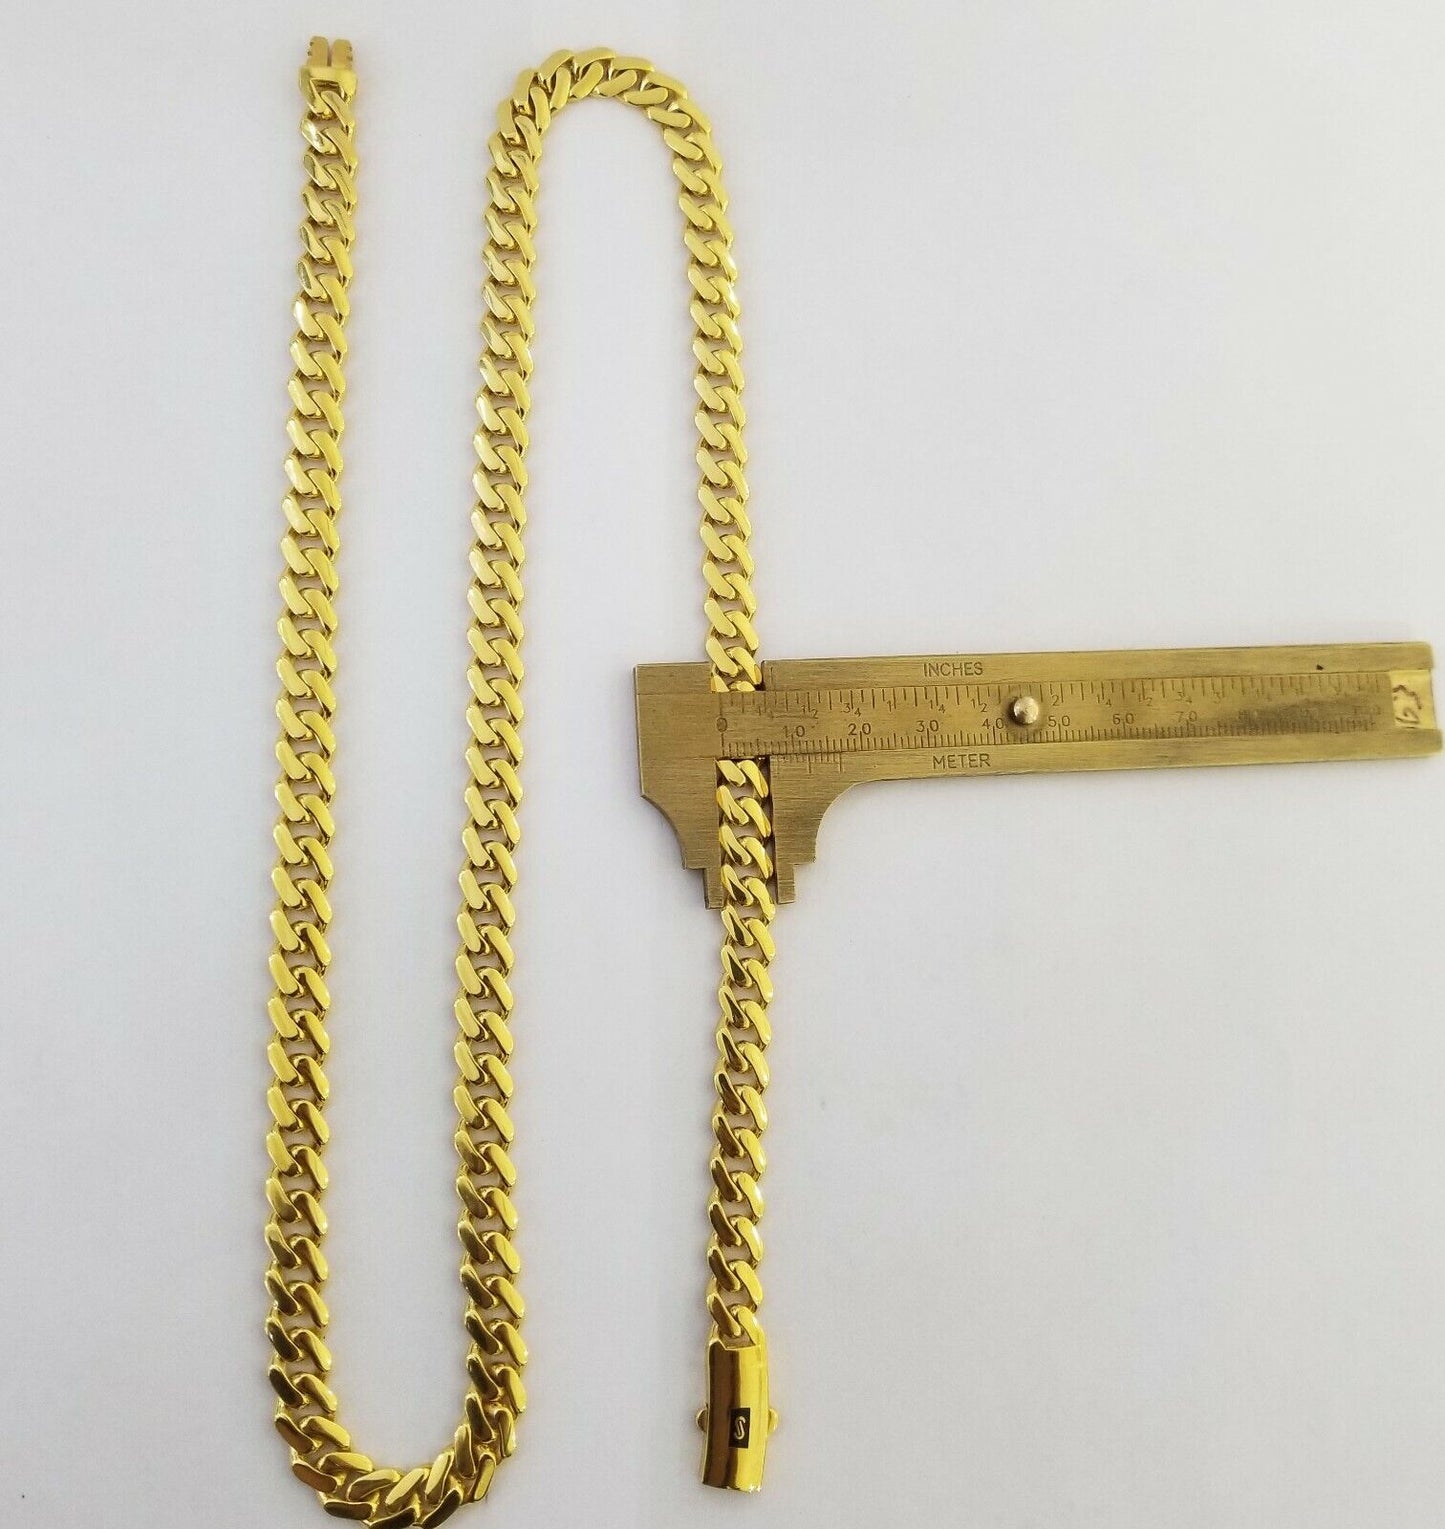 Real 10k Gold Royal Miami Cuban Monaco Link Chain 8mm 20" yellow gold necklace